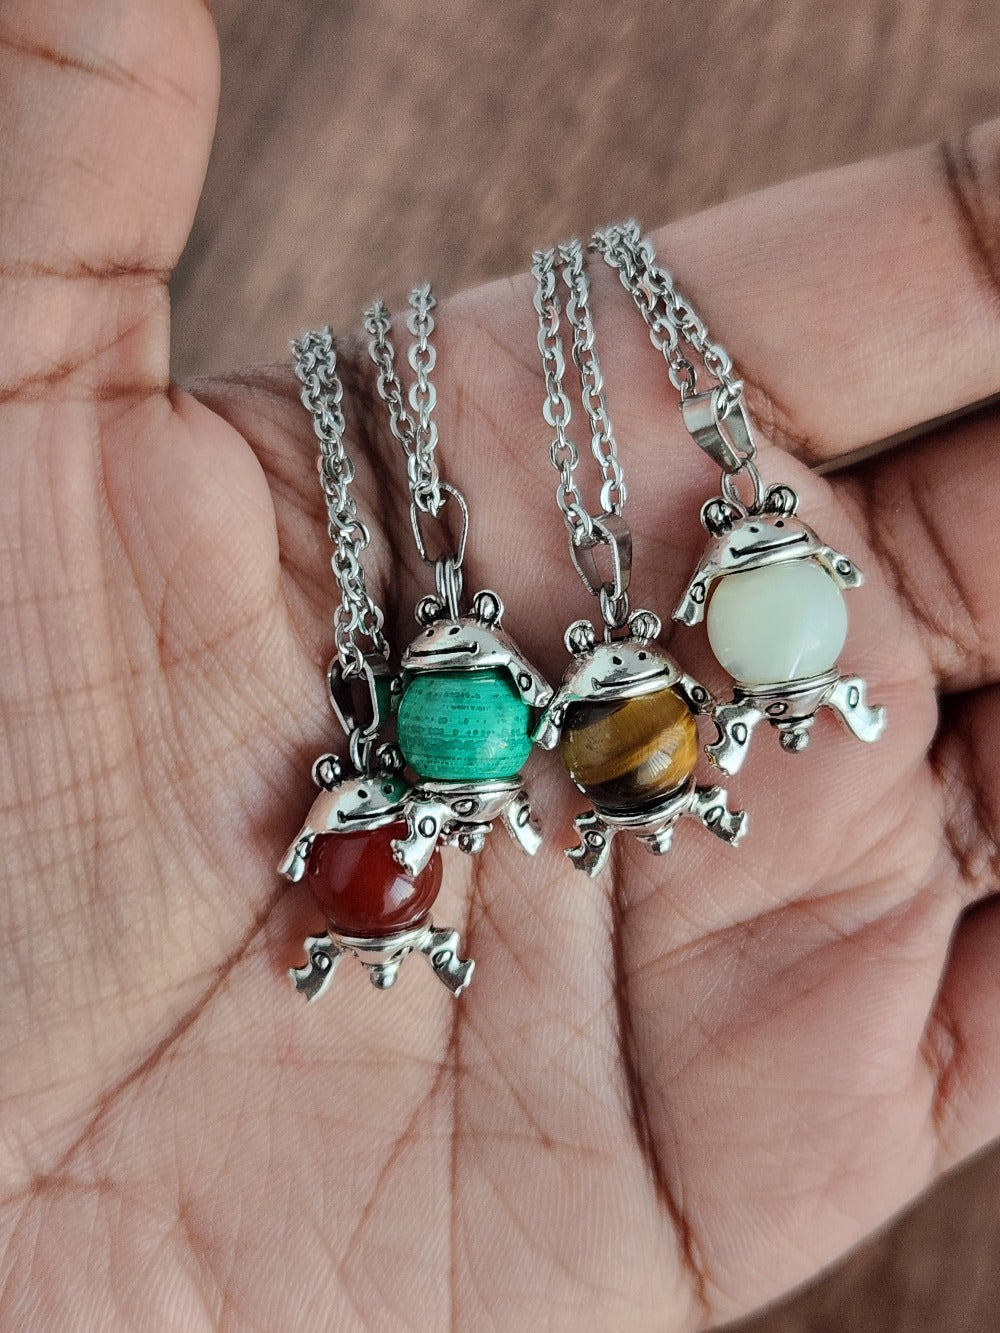 Crystal Frog Necklace